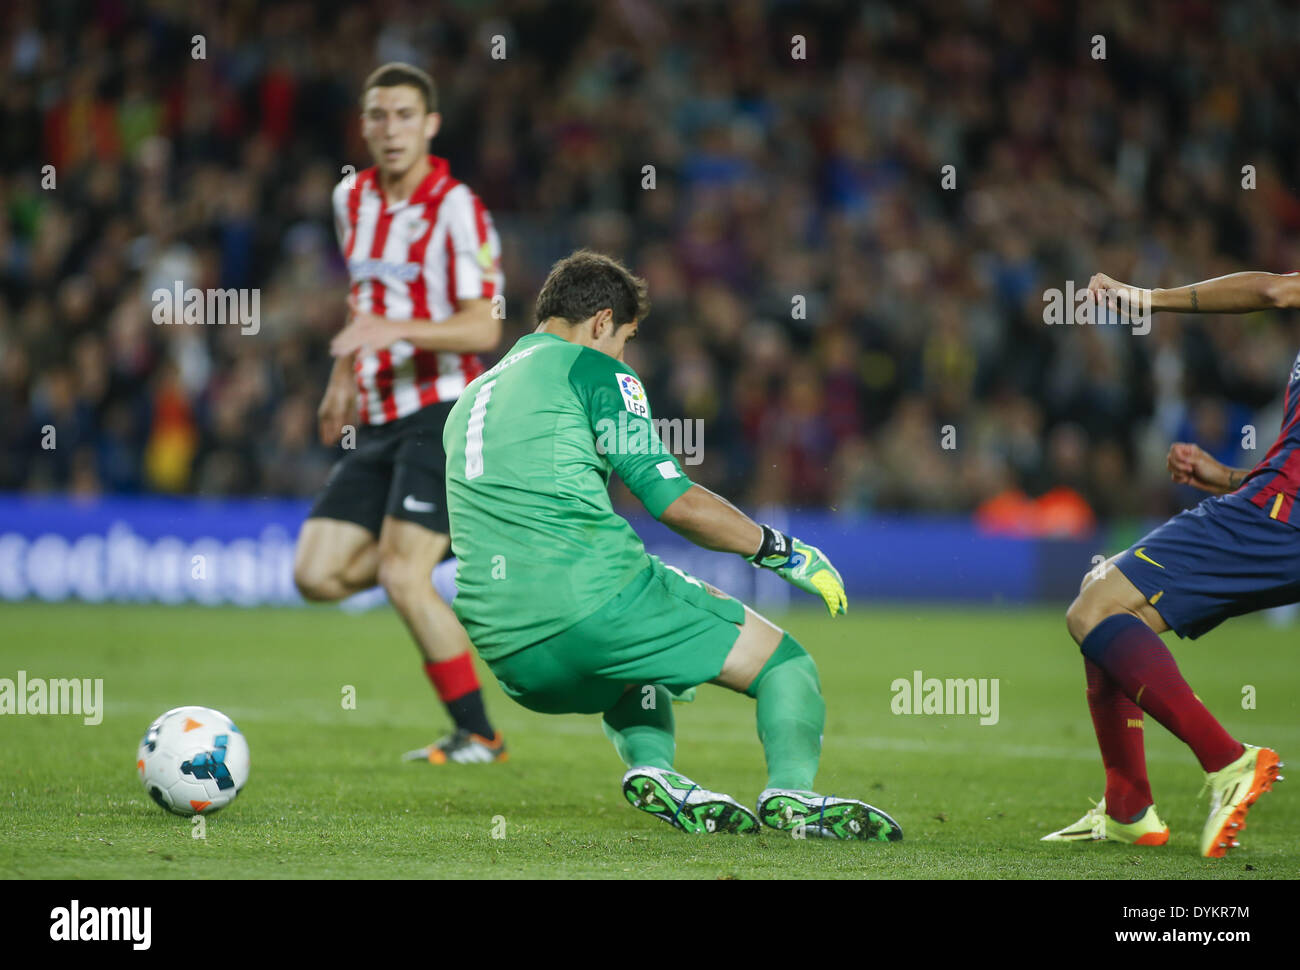 Barcelona, Spain. 20th Apr, 2014. BARCELONA-SPAIN -APRI 20: Goalkeeper and capitan, Iaizoz with Pedro during the match between FC Barcelona and Athletic Bilbao, corresponding to 34th week of the Spanish League played at the Camp Nou on April 20, 2014. (photo: Aline Delfim/Urbanandsport/Nurphoto) © Aline Delfim/NurPhoto/ZUMAPRESS.com/Alamy Live News Stock Photo